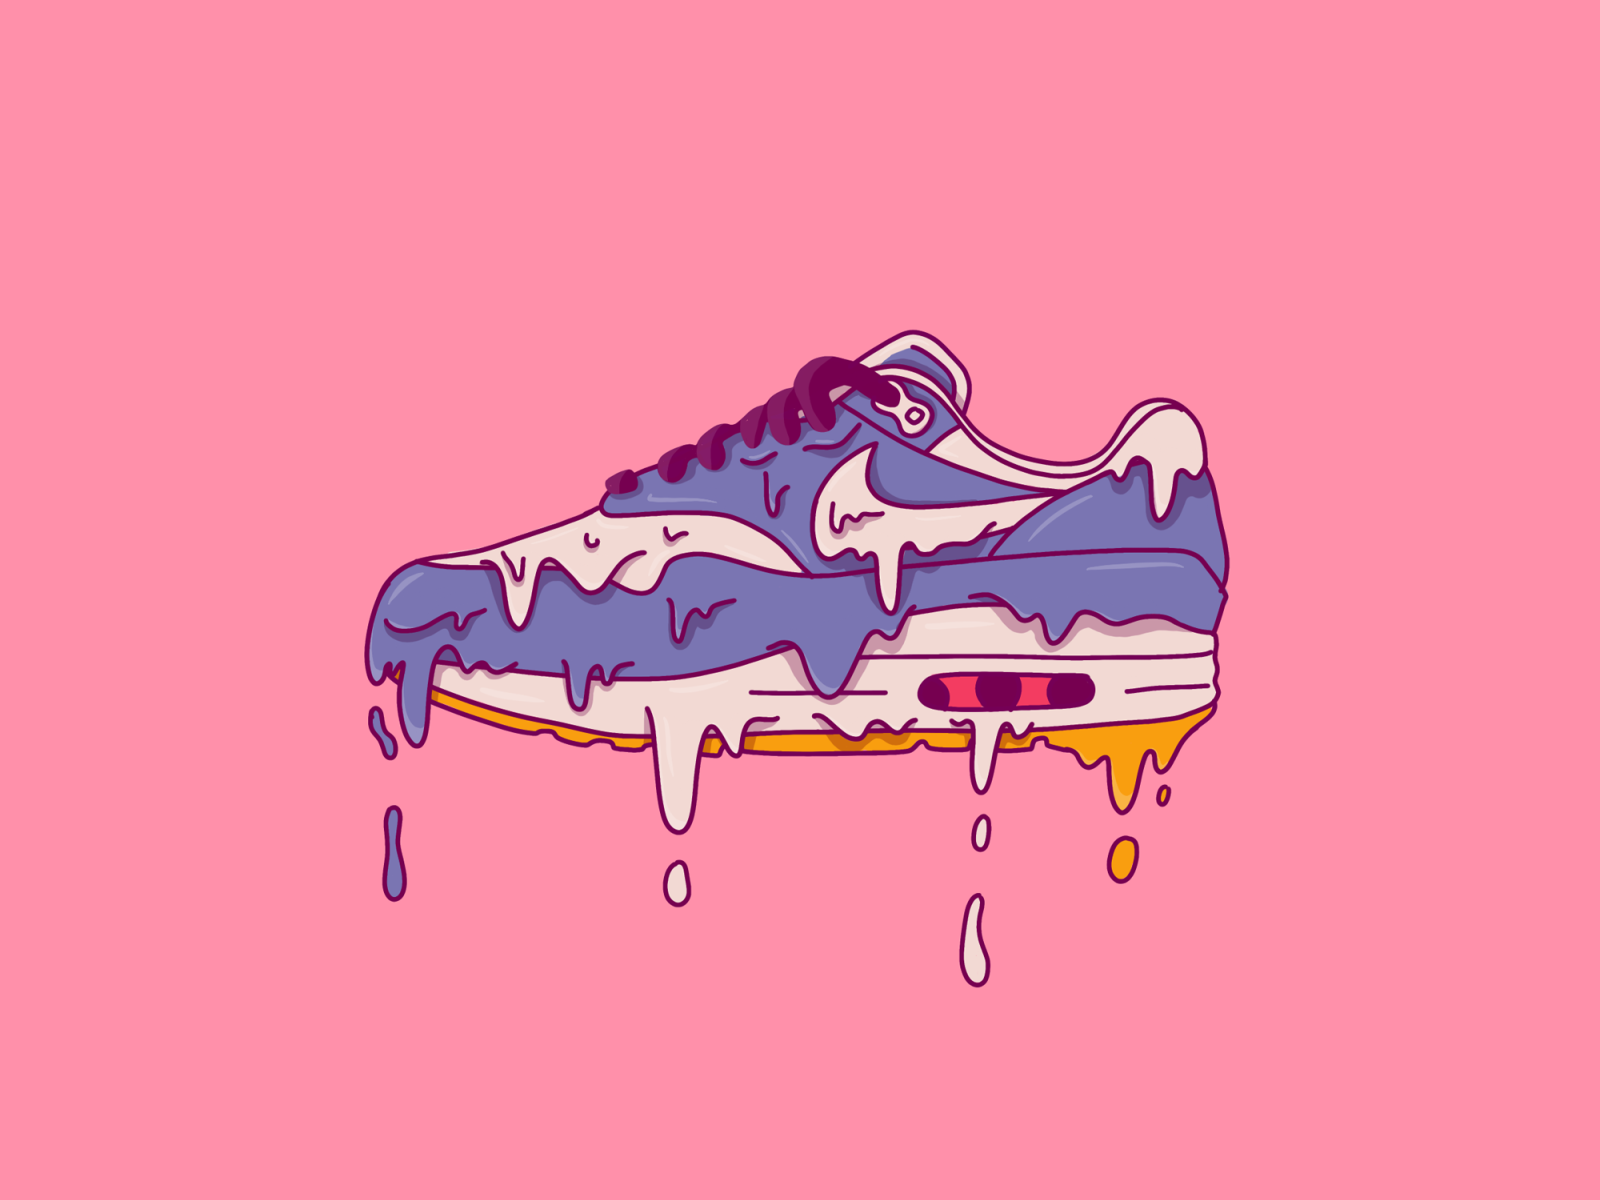 Drippy Nike Wallpapers Nike Drip Wallpapers Wallpaper Cave Check